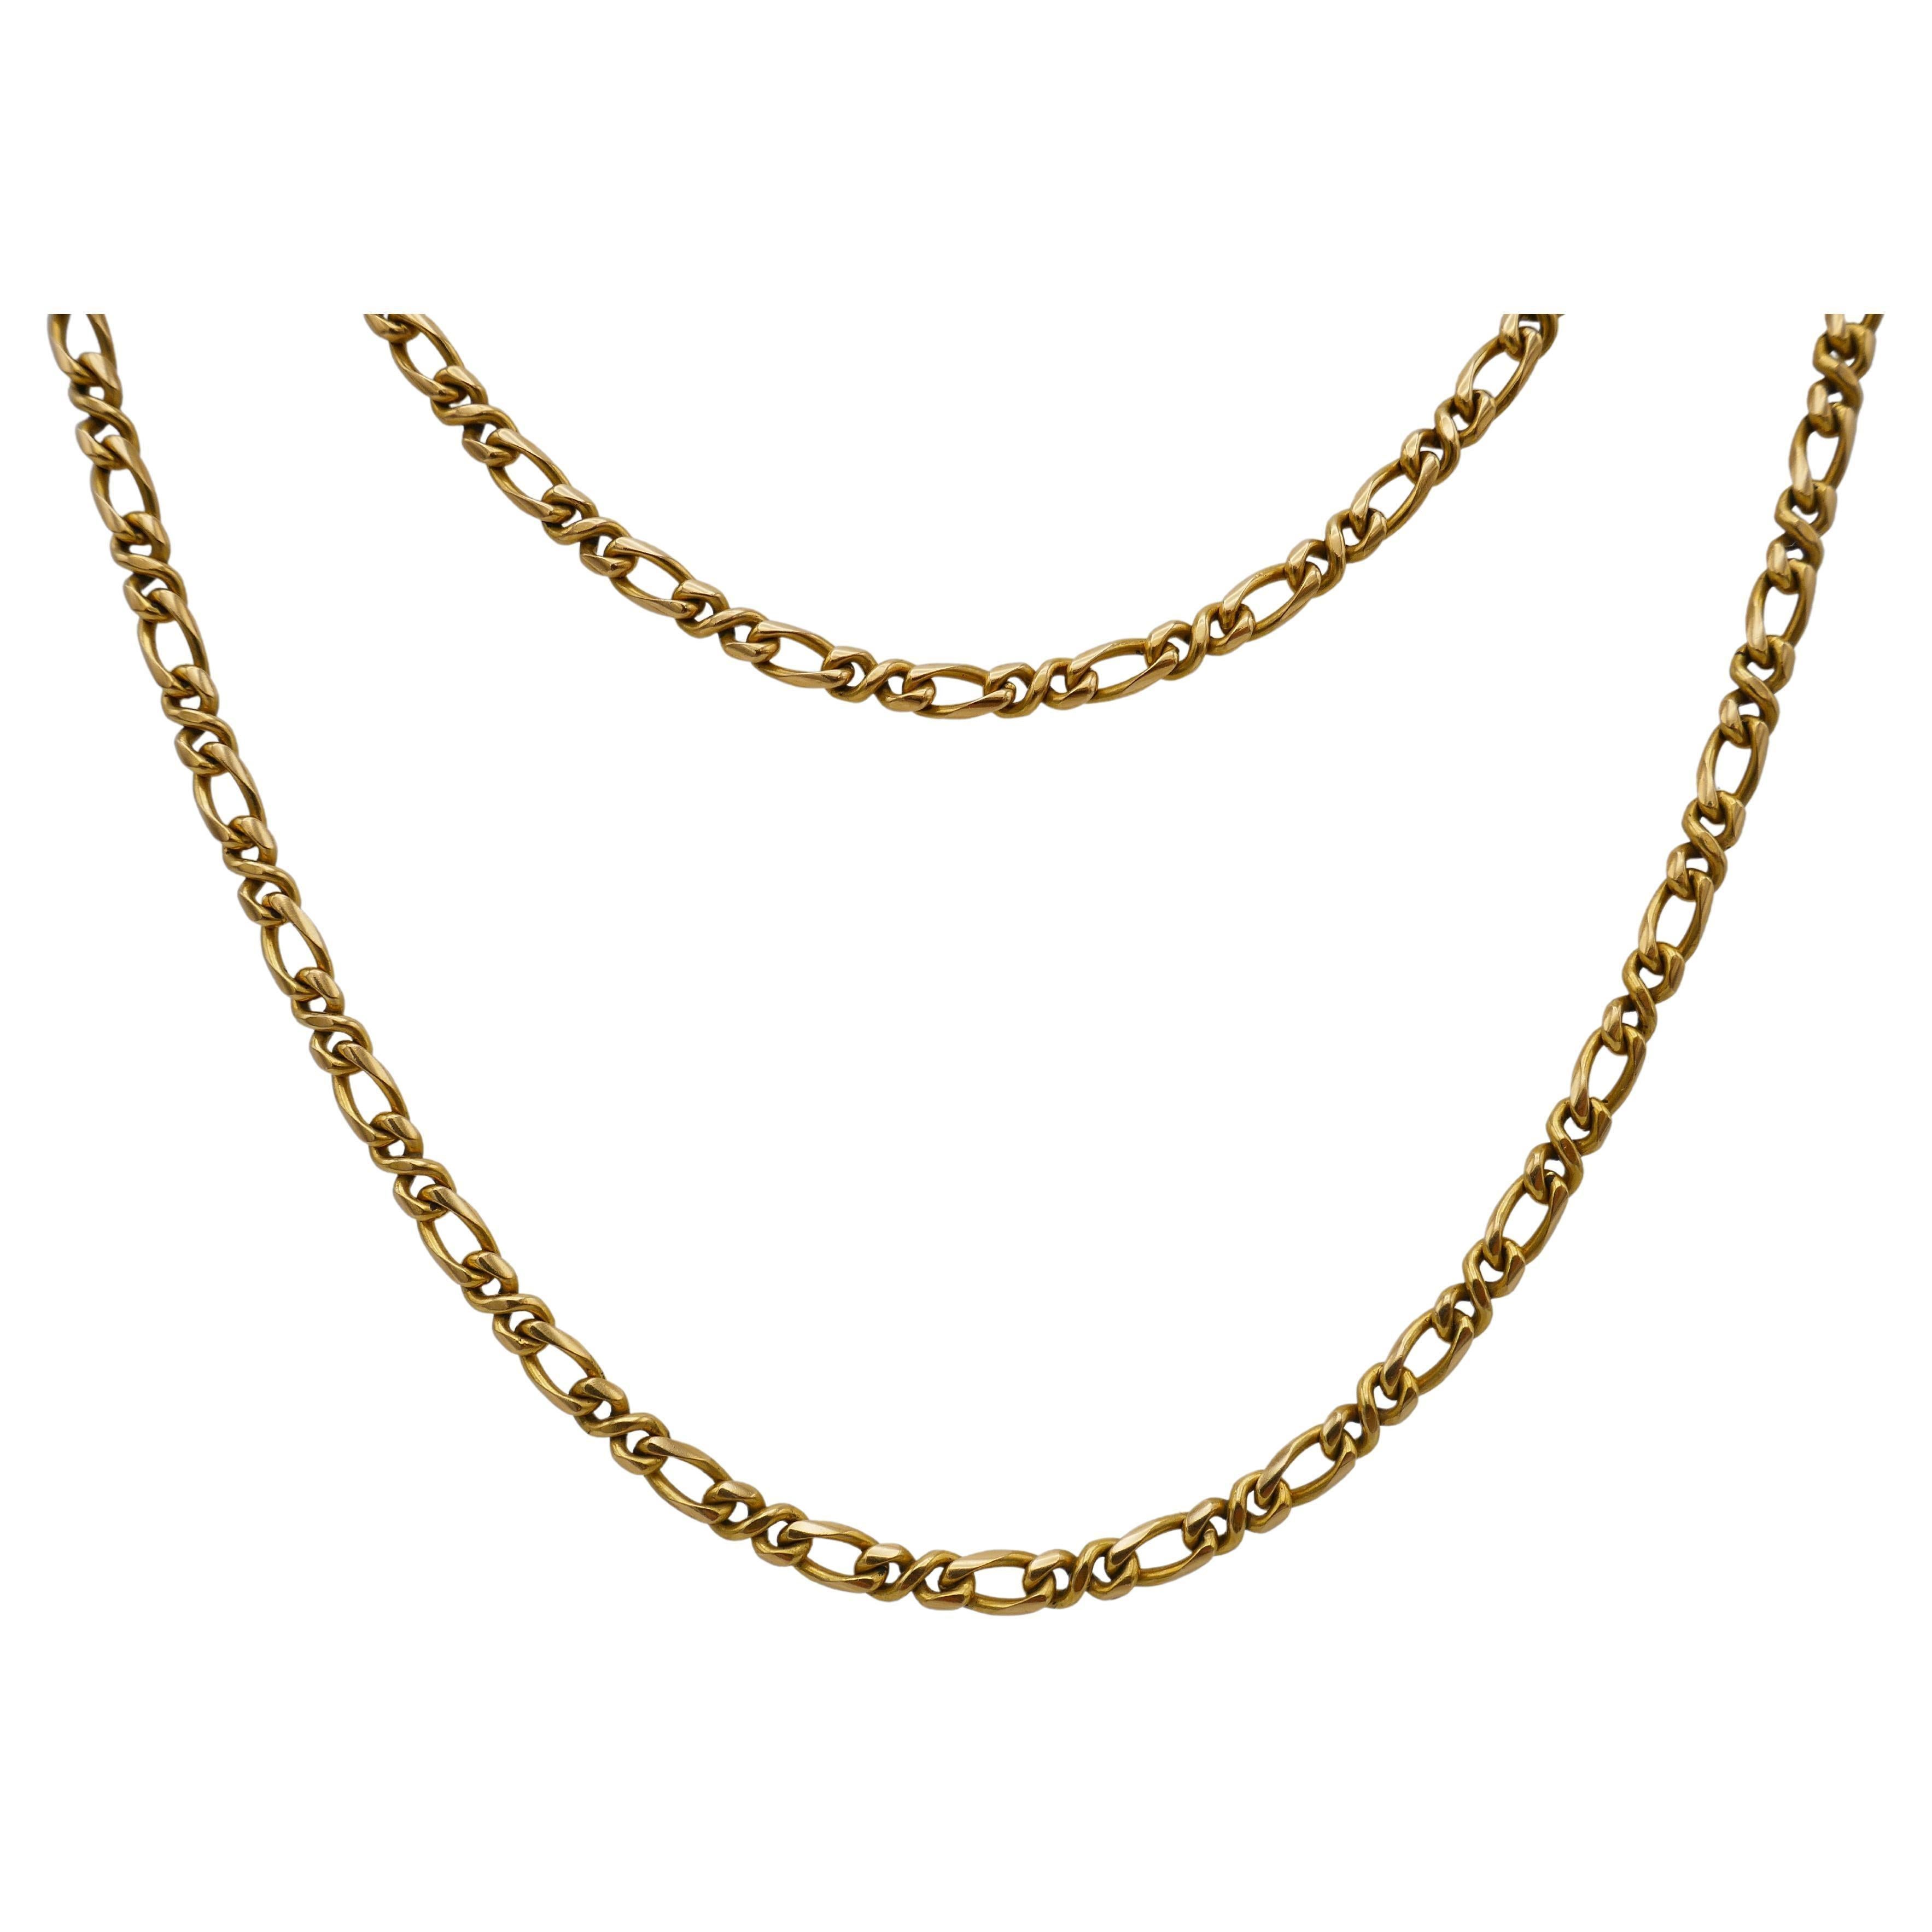 A vintage (1985) Cartier Figaro link gold chain necklace. Is perfect for layering or wearing solo. Stamped with Cartier maker's mark and a hallmark for 18k gold. 
Measurements: 31.5